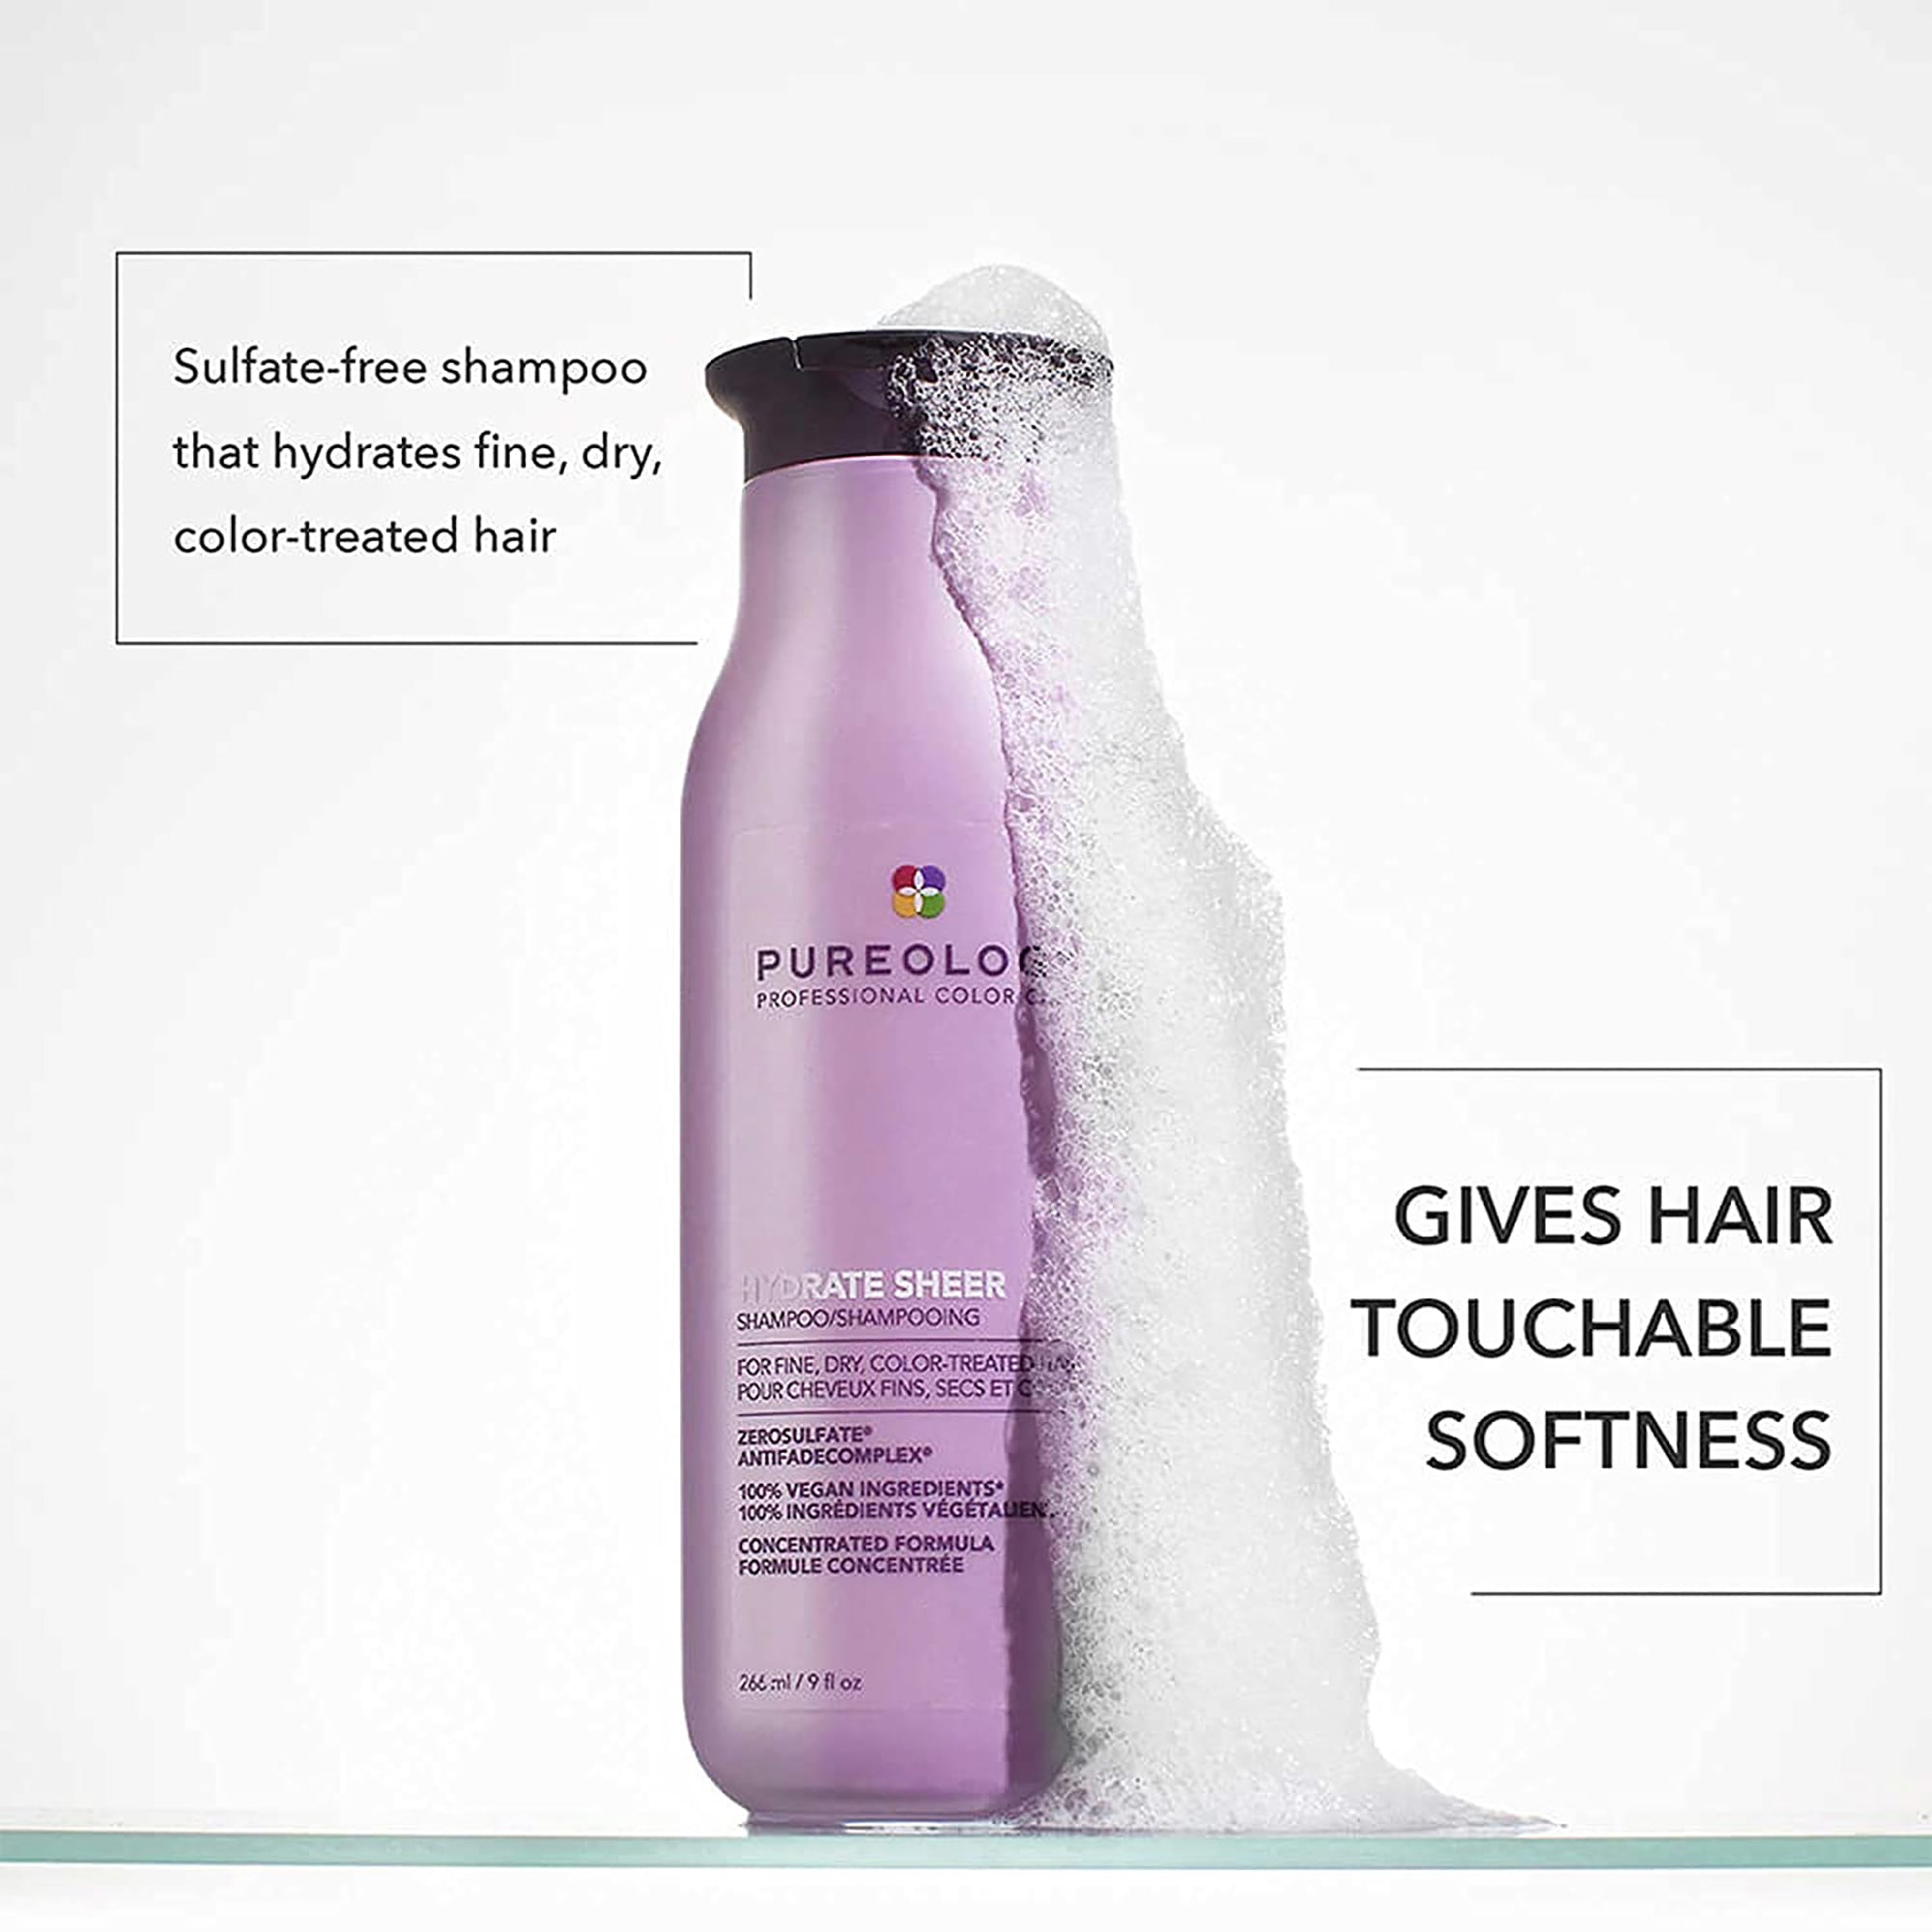 Pureology Hydrate Sheer Shampoo & Conditioner Duo / 9OZ